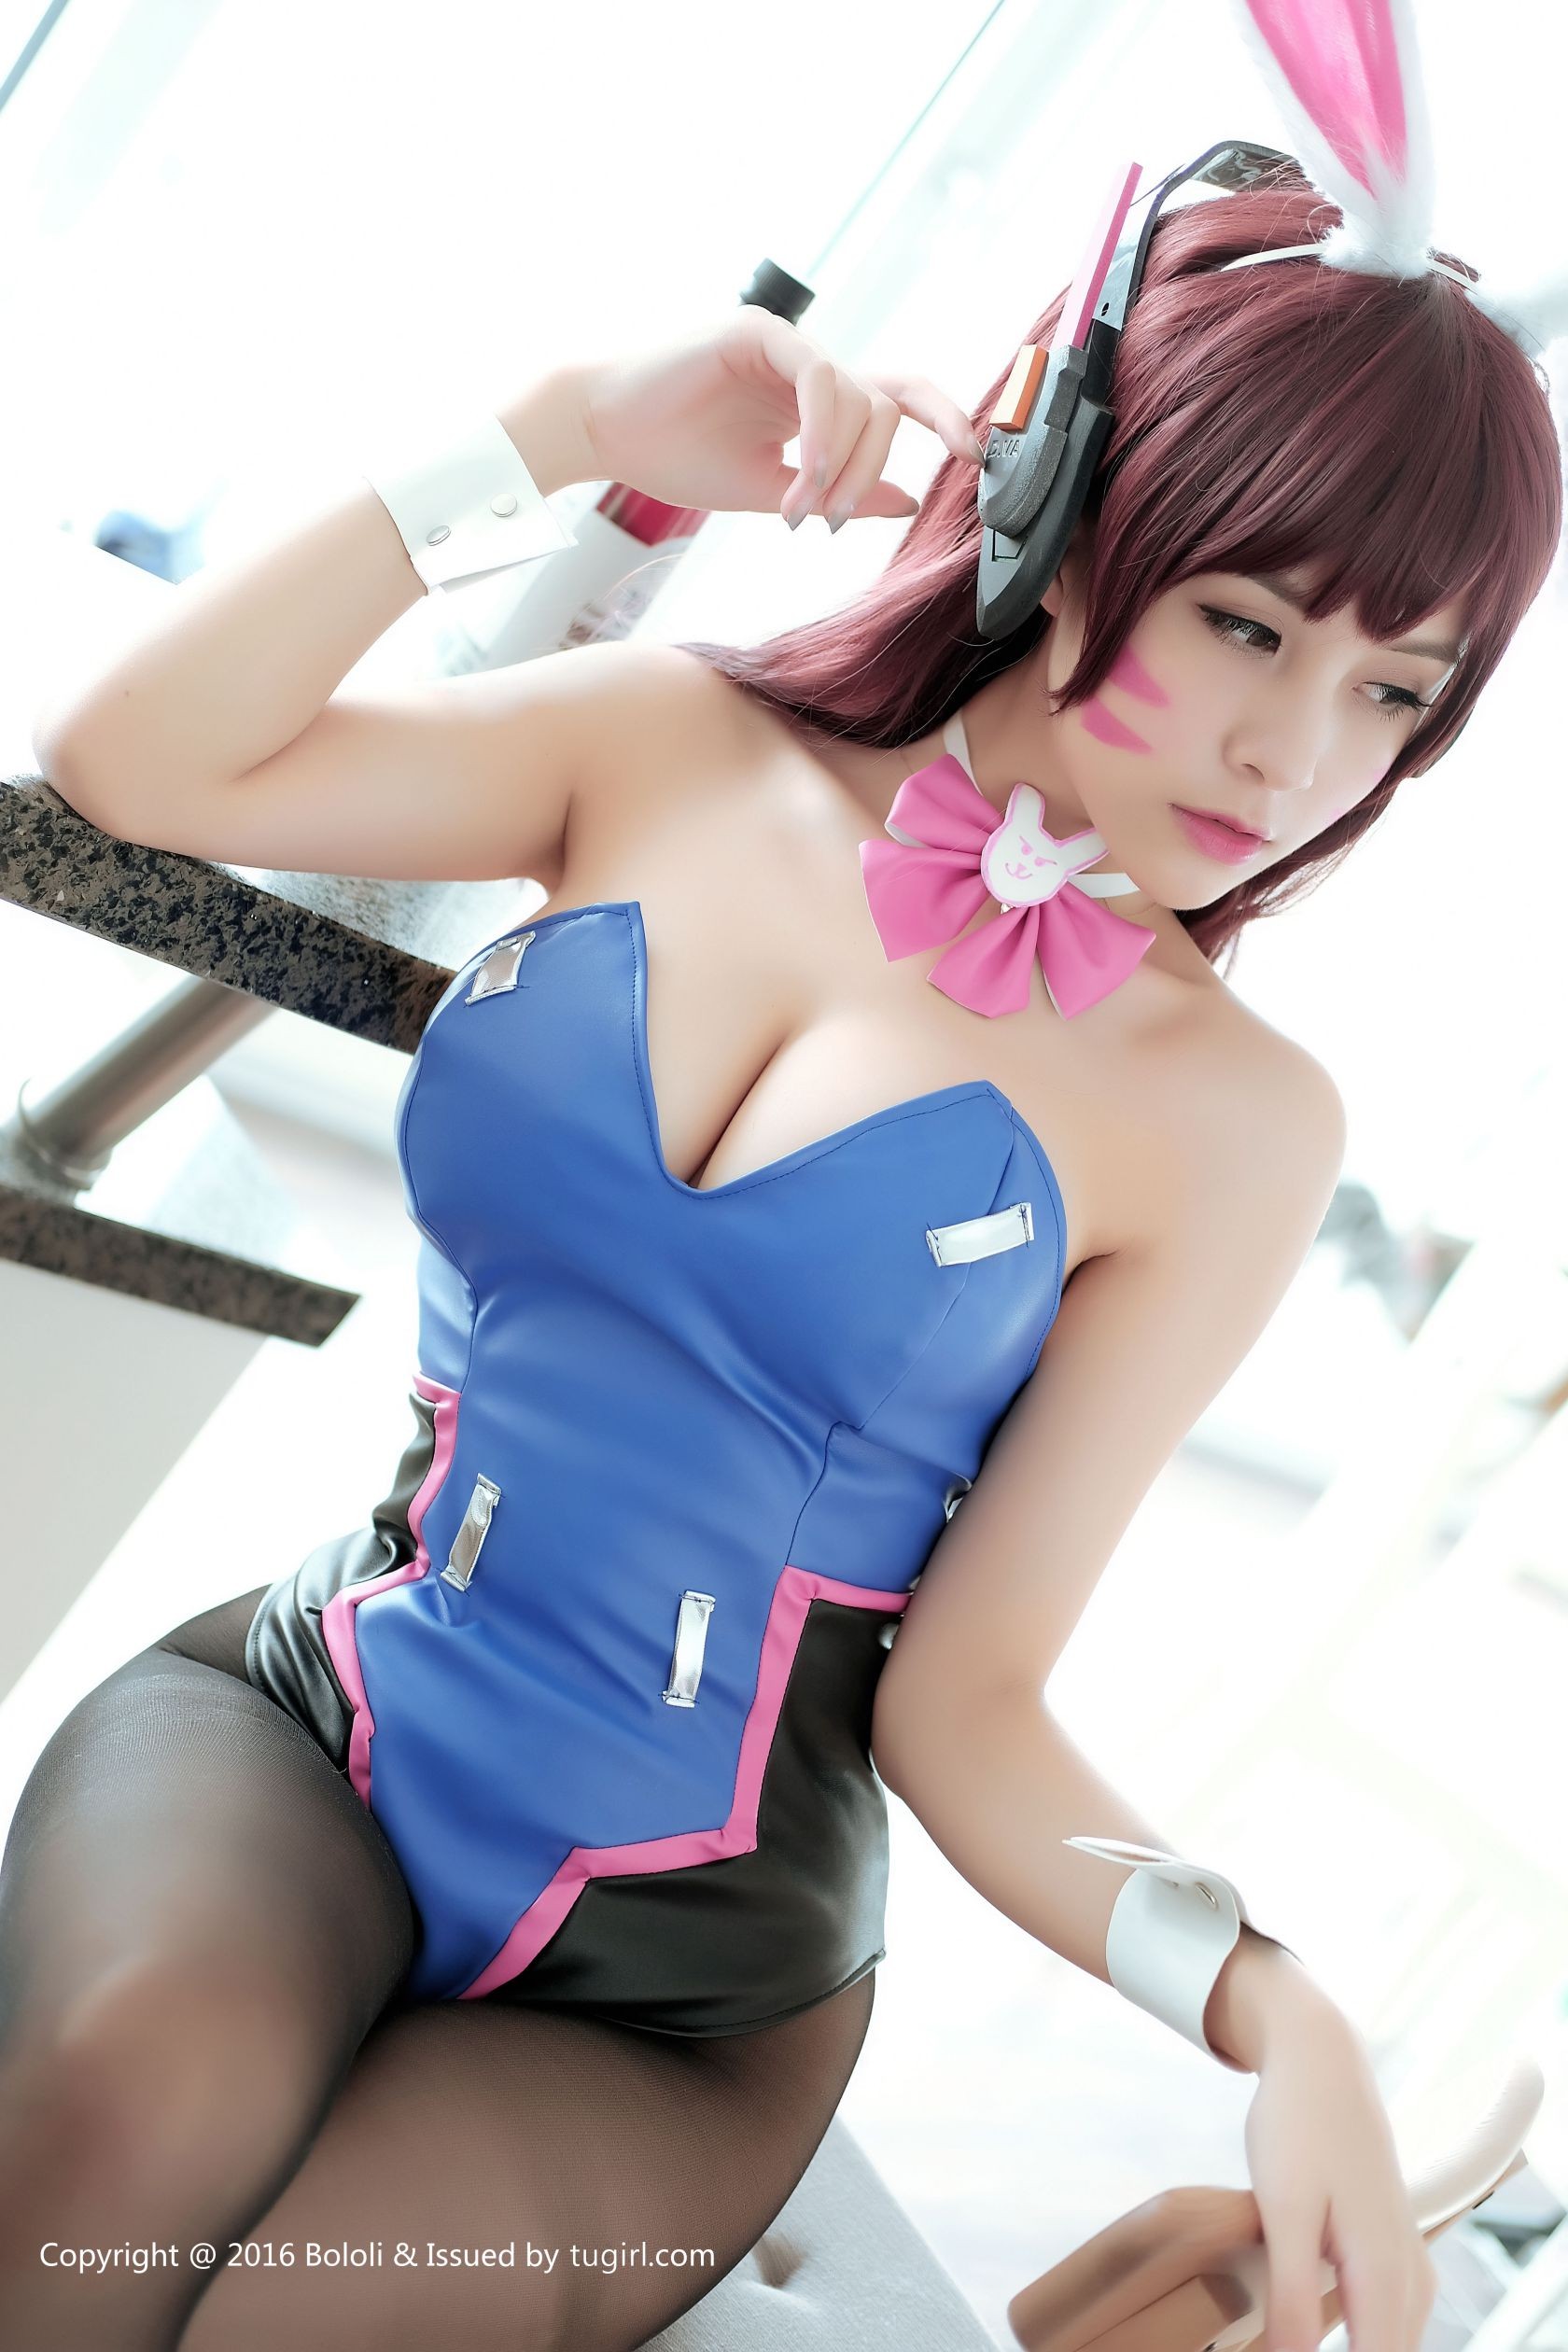 People 1680x2520 D.Va (Overwatch) cosplay cleavage sitting dyed hair hairband costumes Xia Mei Jiang black stockings Bololi Asian women